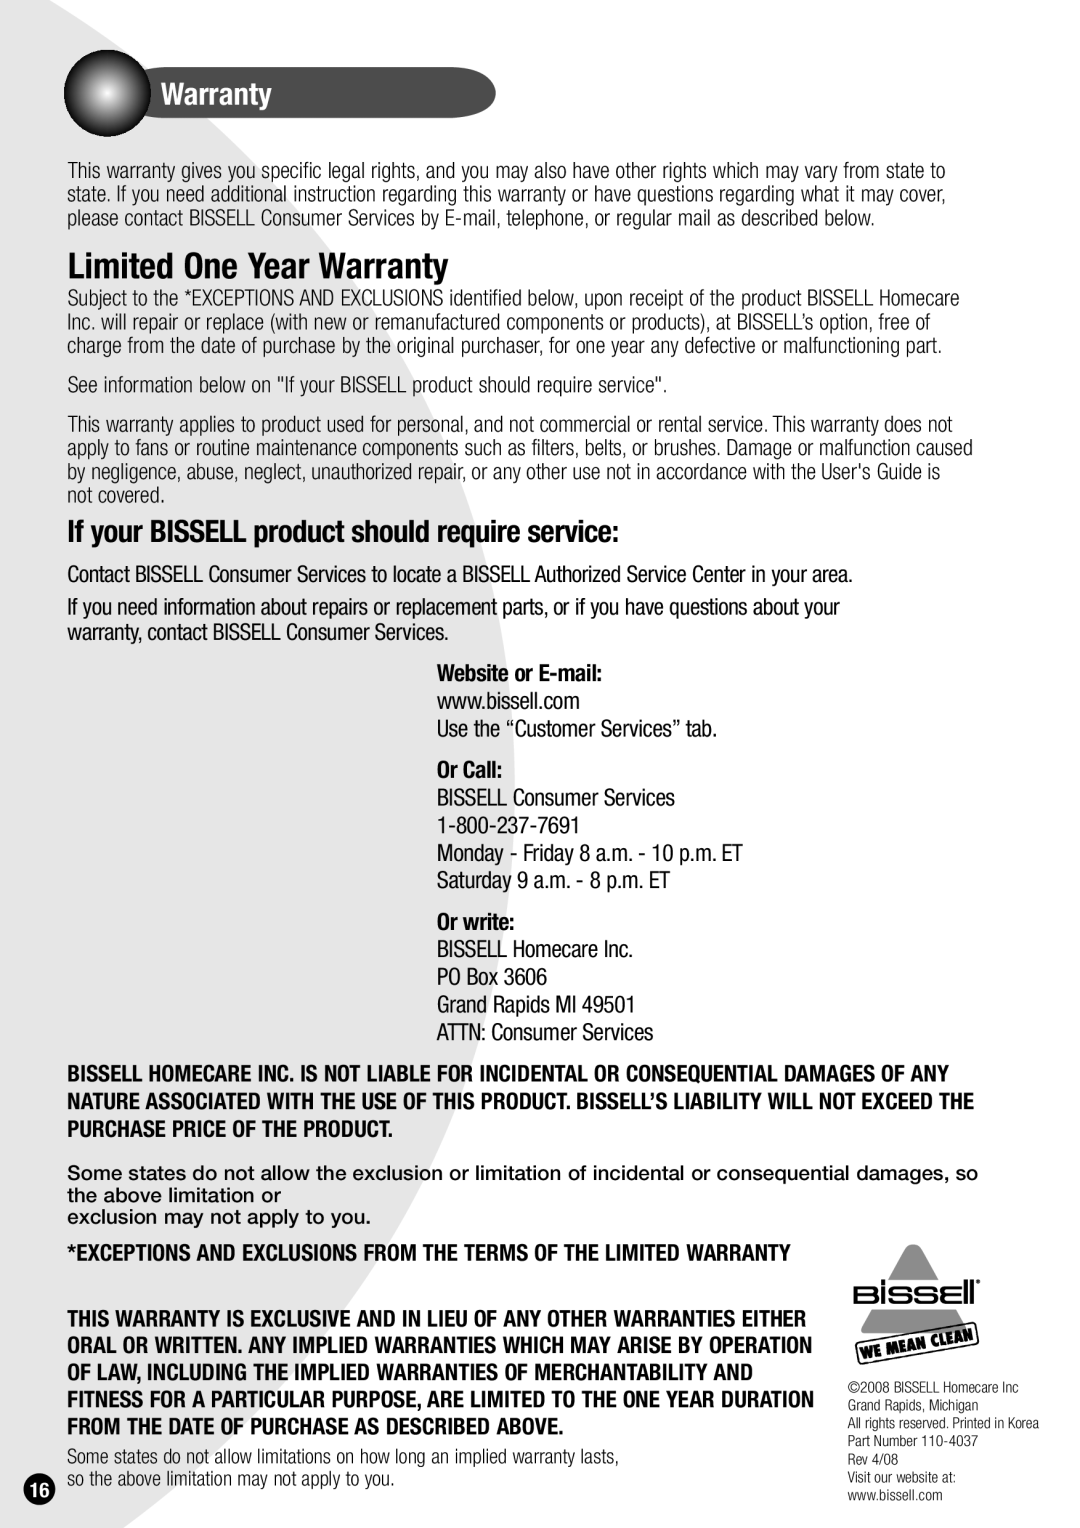 Bissell 73G8, 20Q9 Limited One Year Warranty, If your BISSELL product should require service, Website or E-mail, Or Call 